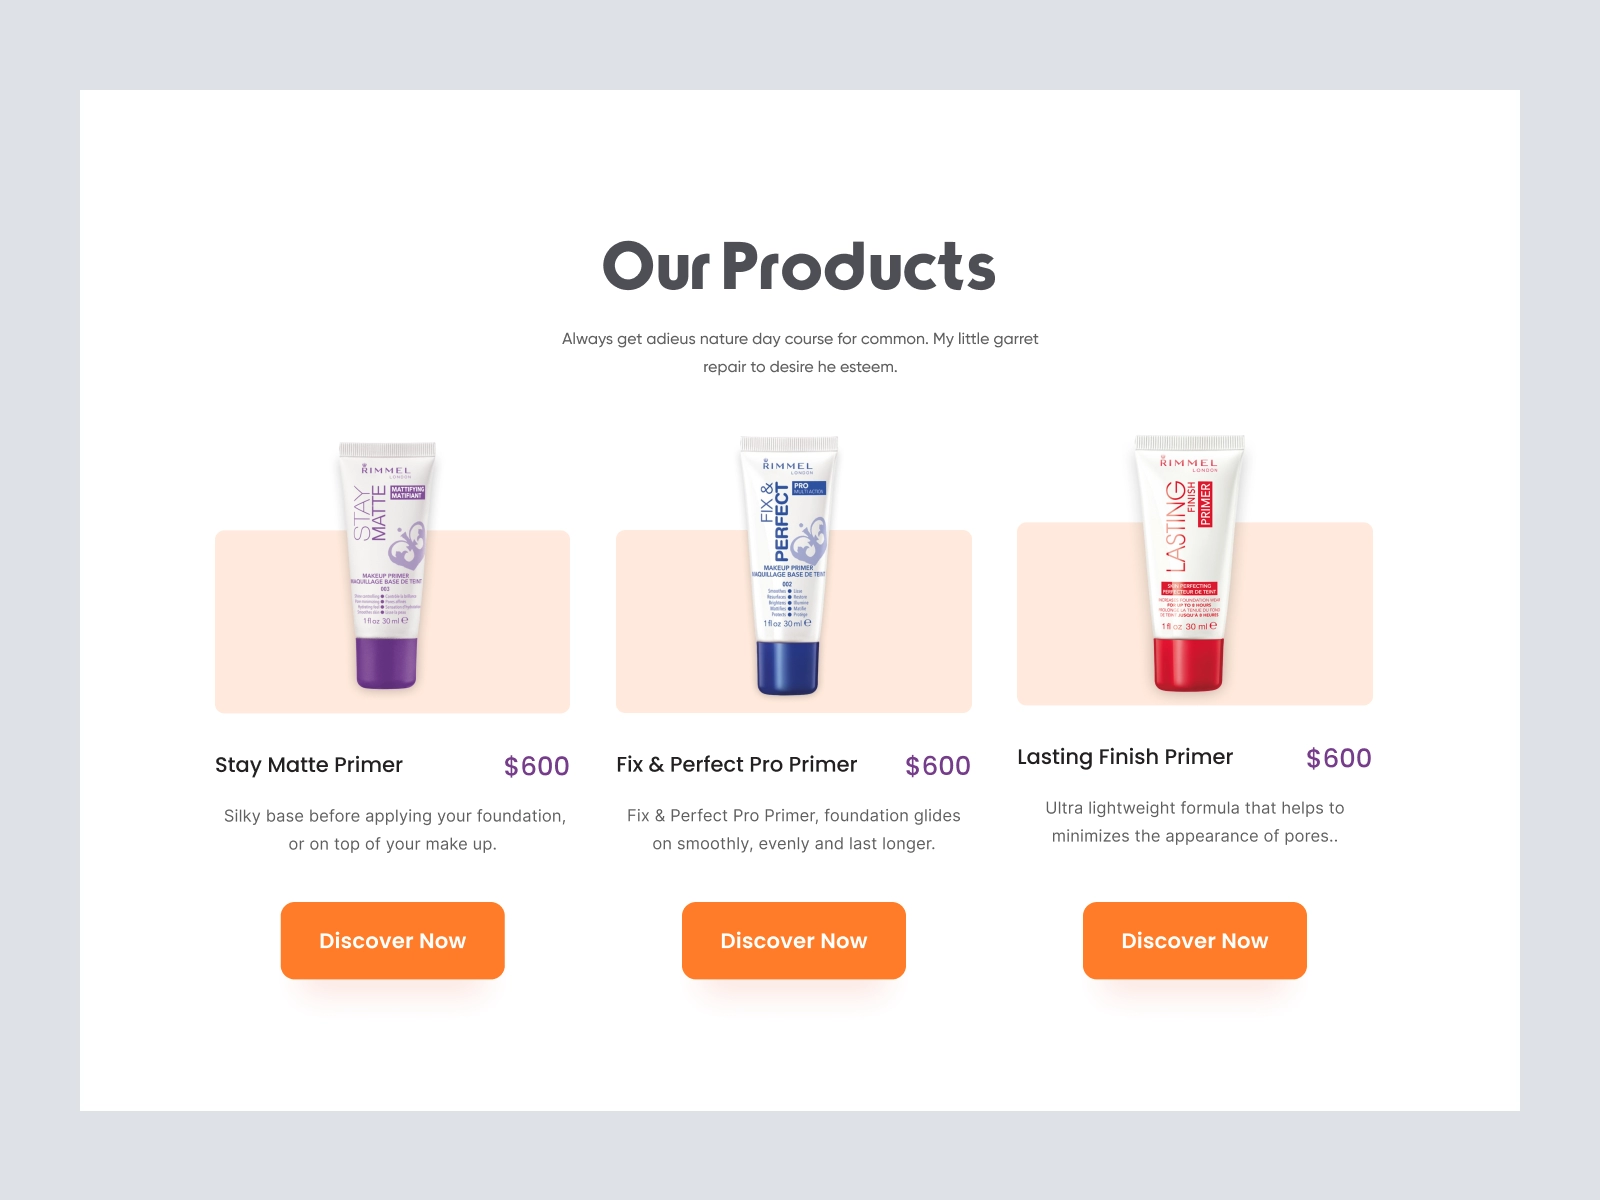 RIMMEL - Shopify Store Design for Cosmetics Products for Figma and Adobe XD - screen 3